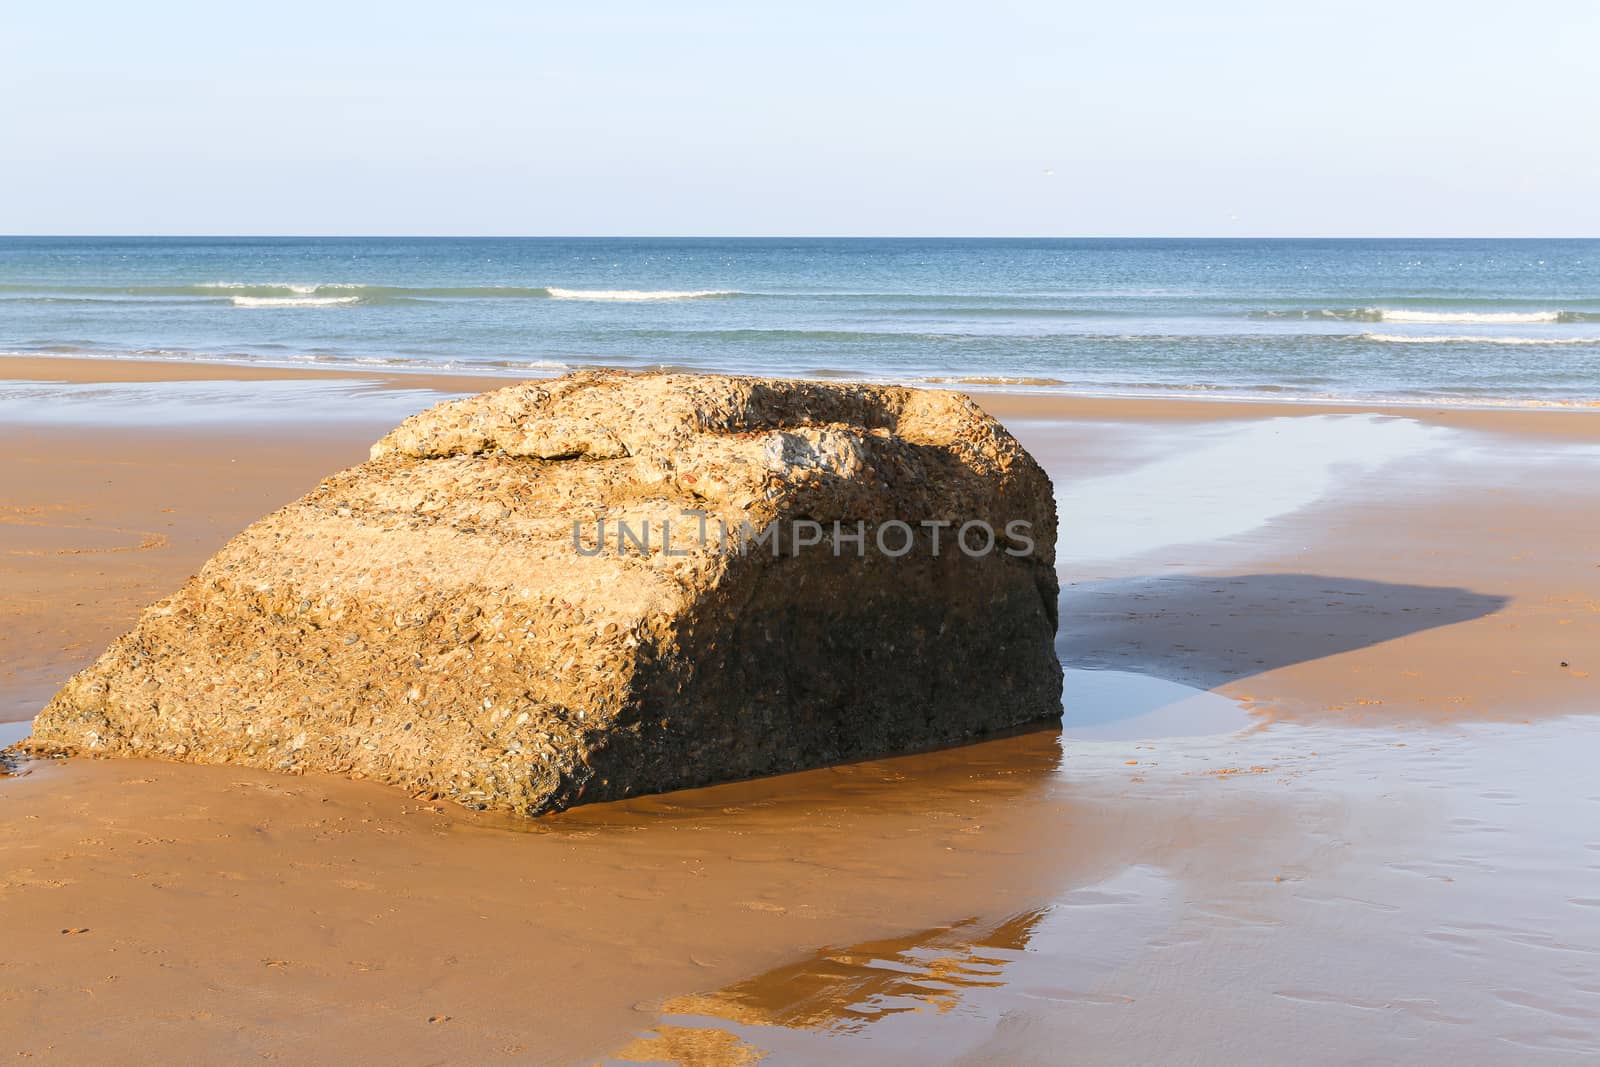 Ruins of harbor built by the Allies in Arromanches, Normandy, France